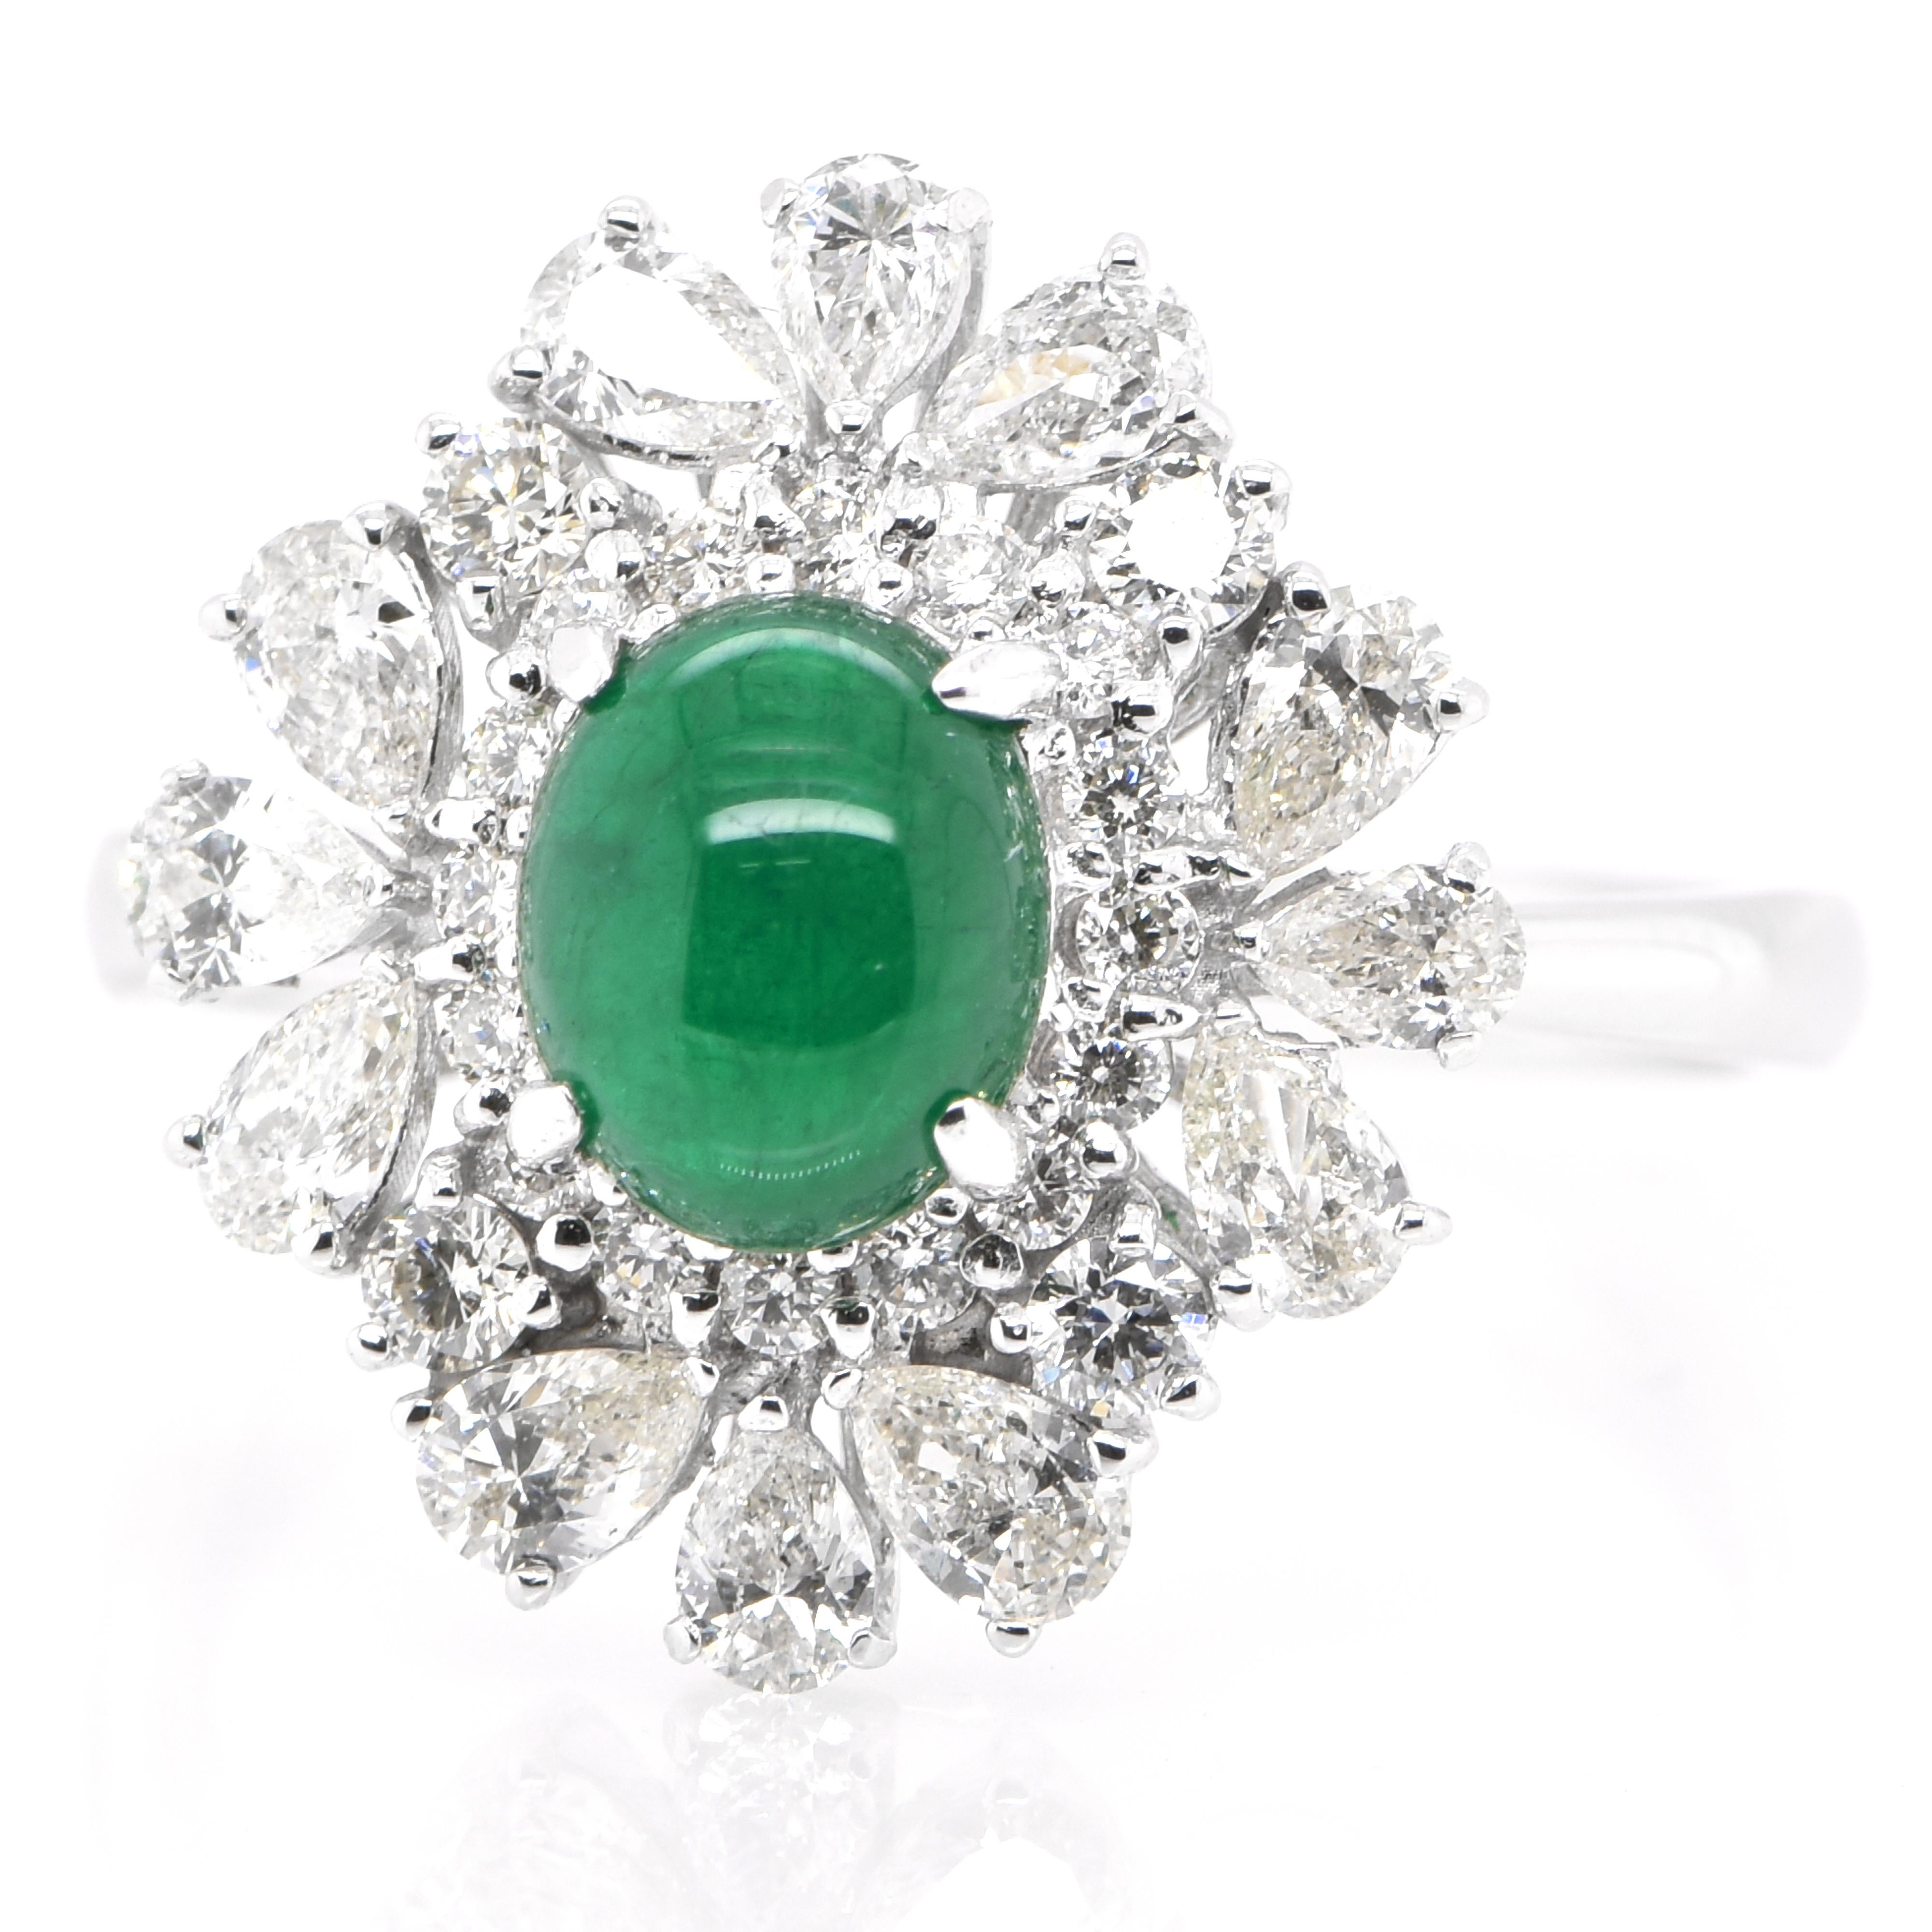 A stunning ring featuring a 1.13 Carat Natural Emerald Cabochon and 1.01 Carats of Diamond Accents set in Platinum. People have admired emerald’s green for thousands of years. Emeralds have always been associated with the lushest landscapes and the